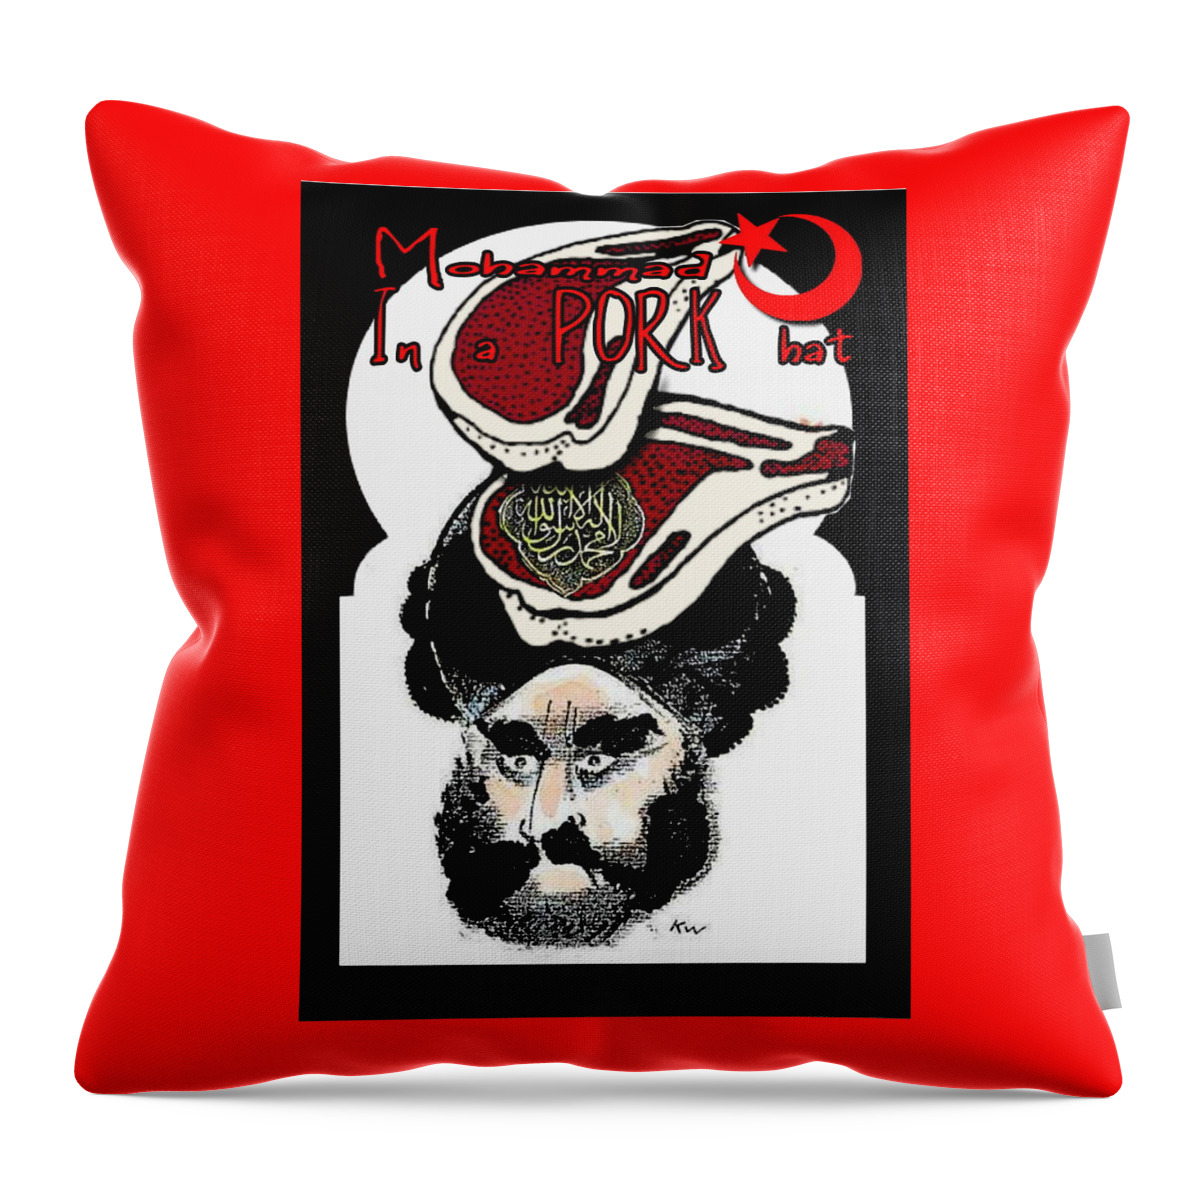 Mohammad Throw Pillow featuring the digital art Mohammad In A Pork Hat by Ryan Almighty